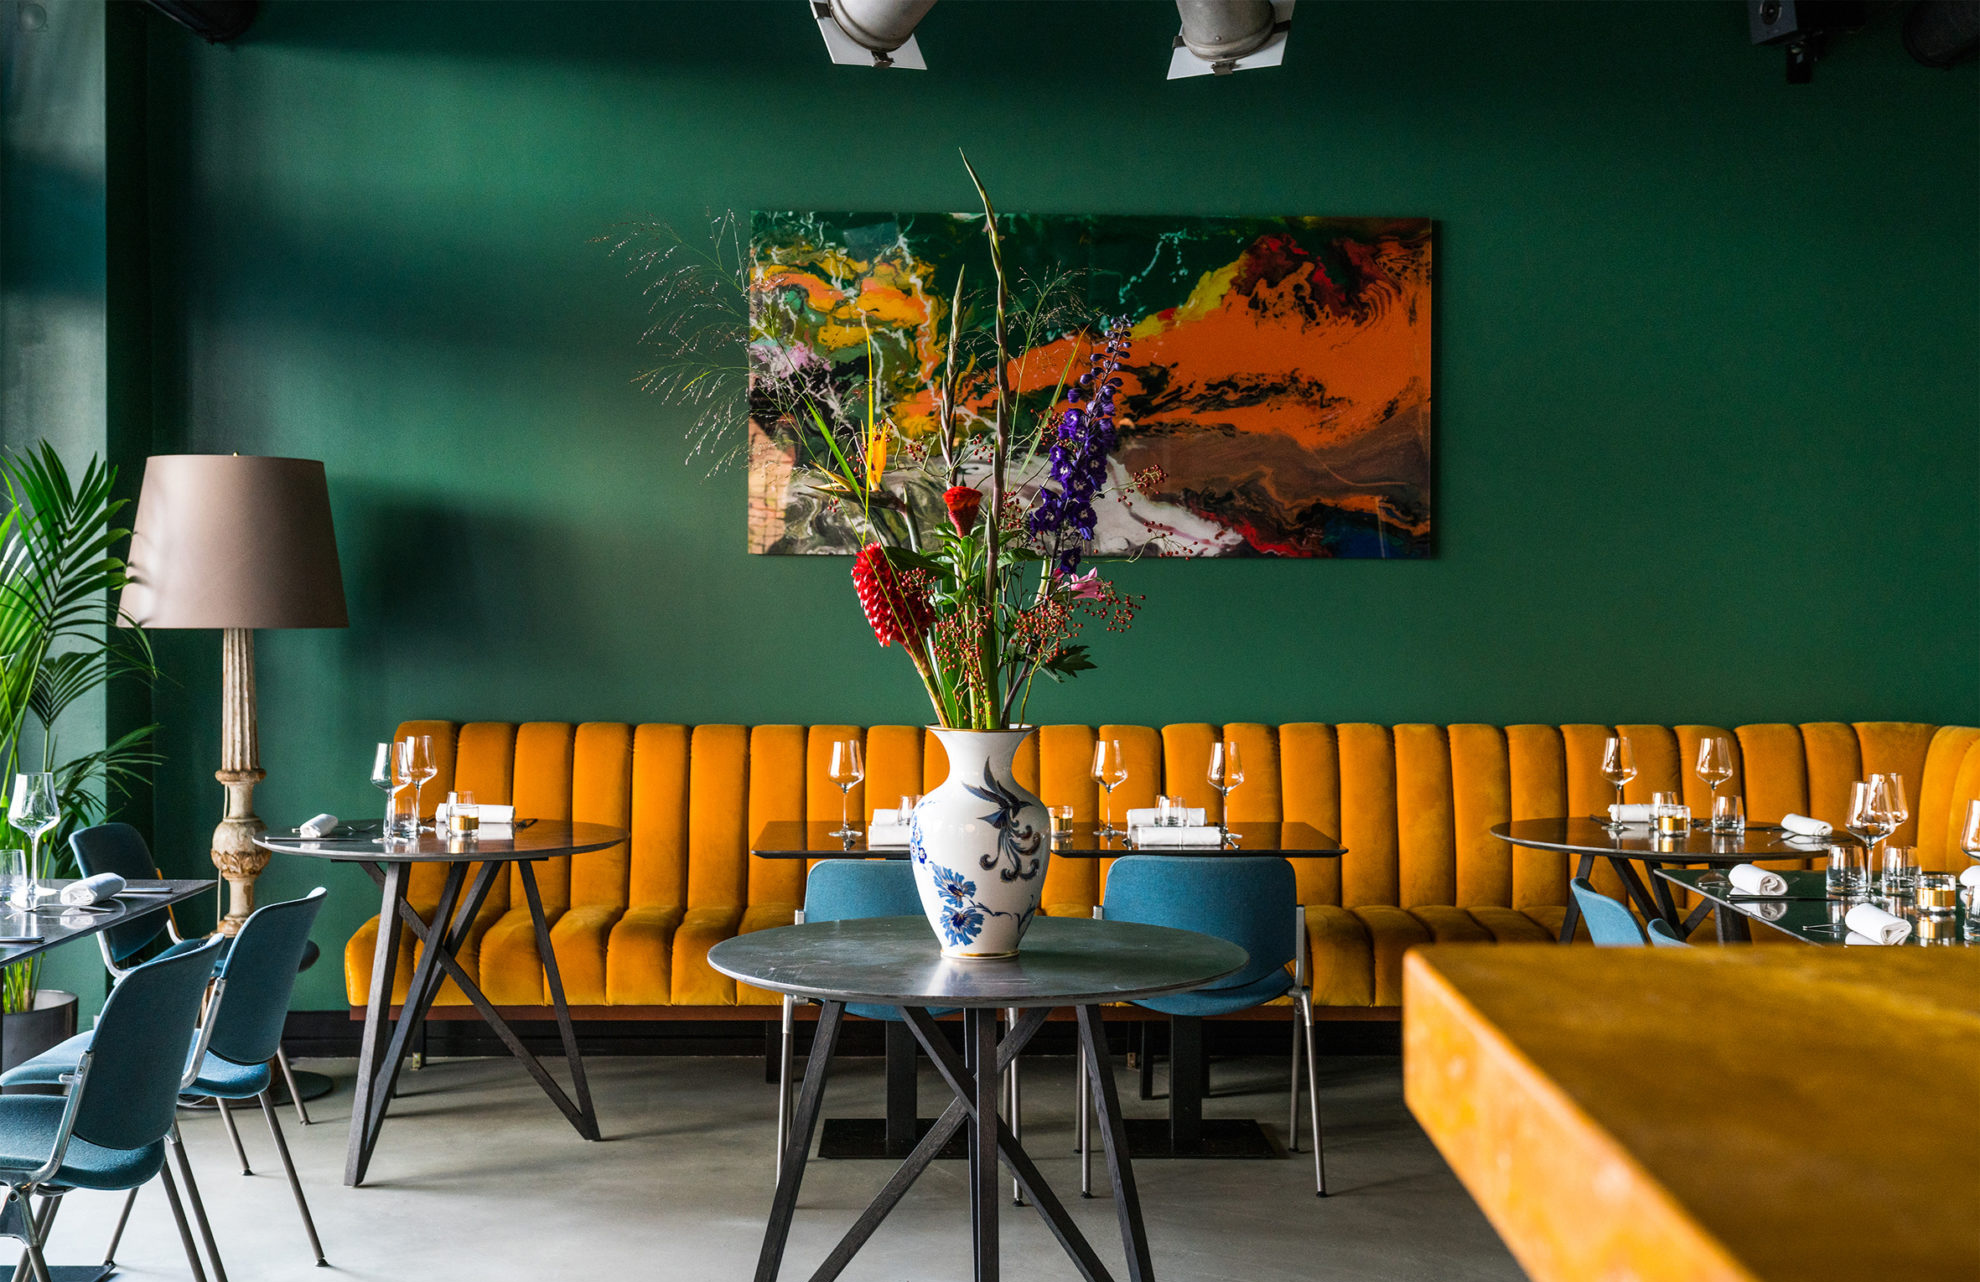 To The Bone restaurant in Berlin is awash with colour